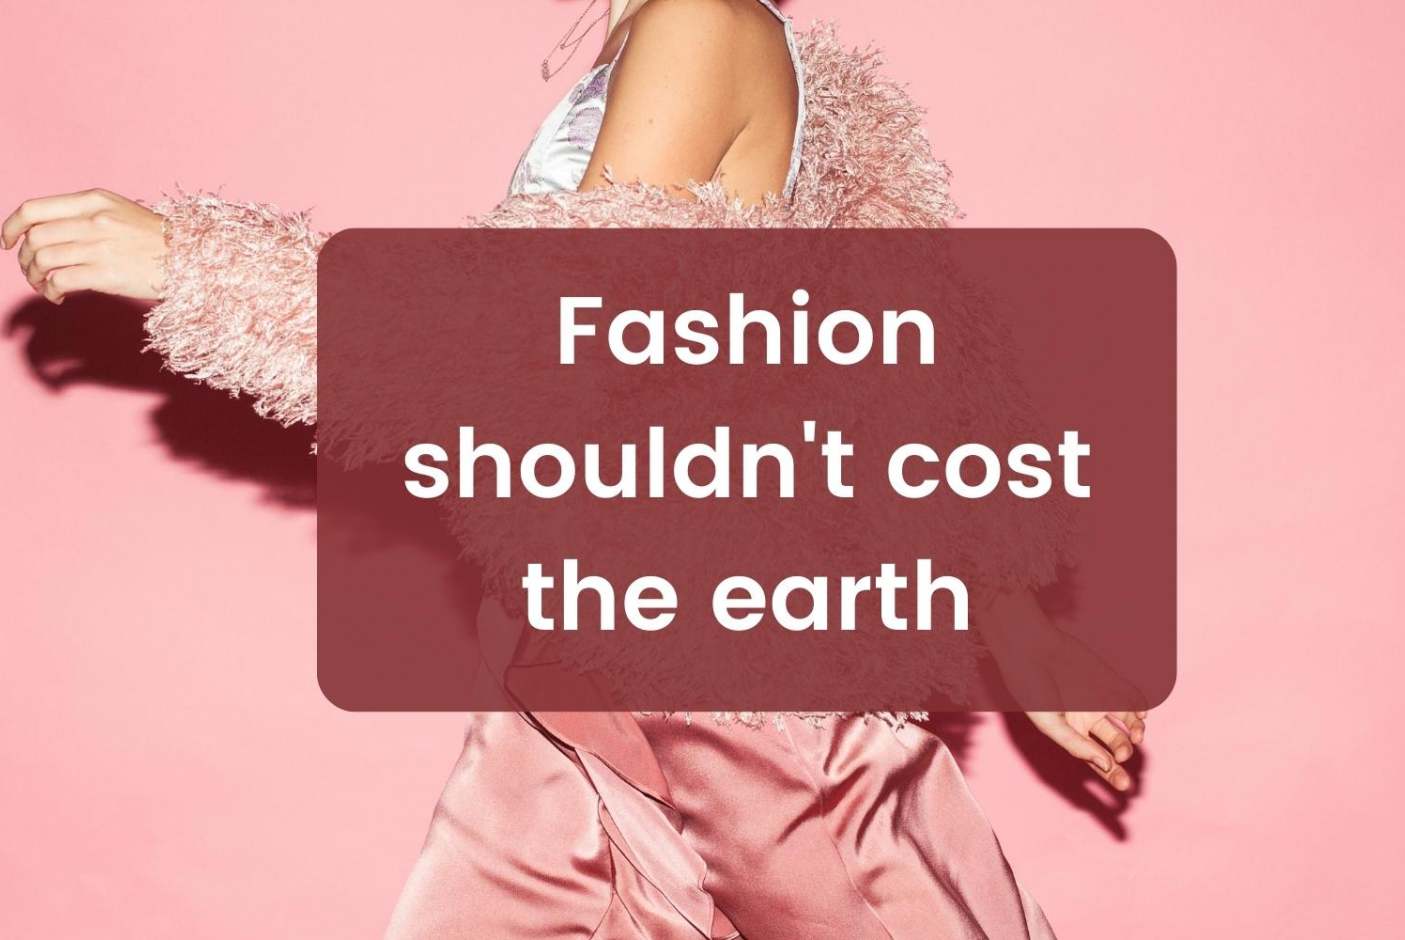 The money's in the fake: Profitability in the fashion knockoff industry